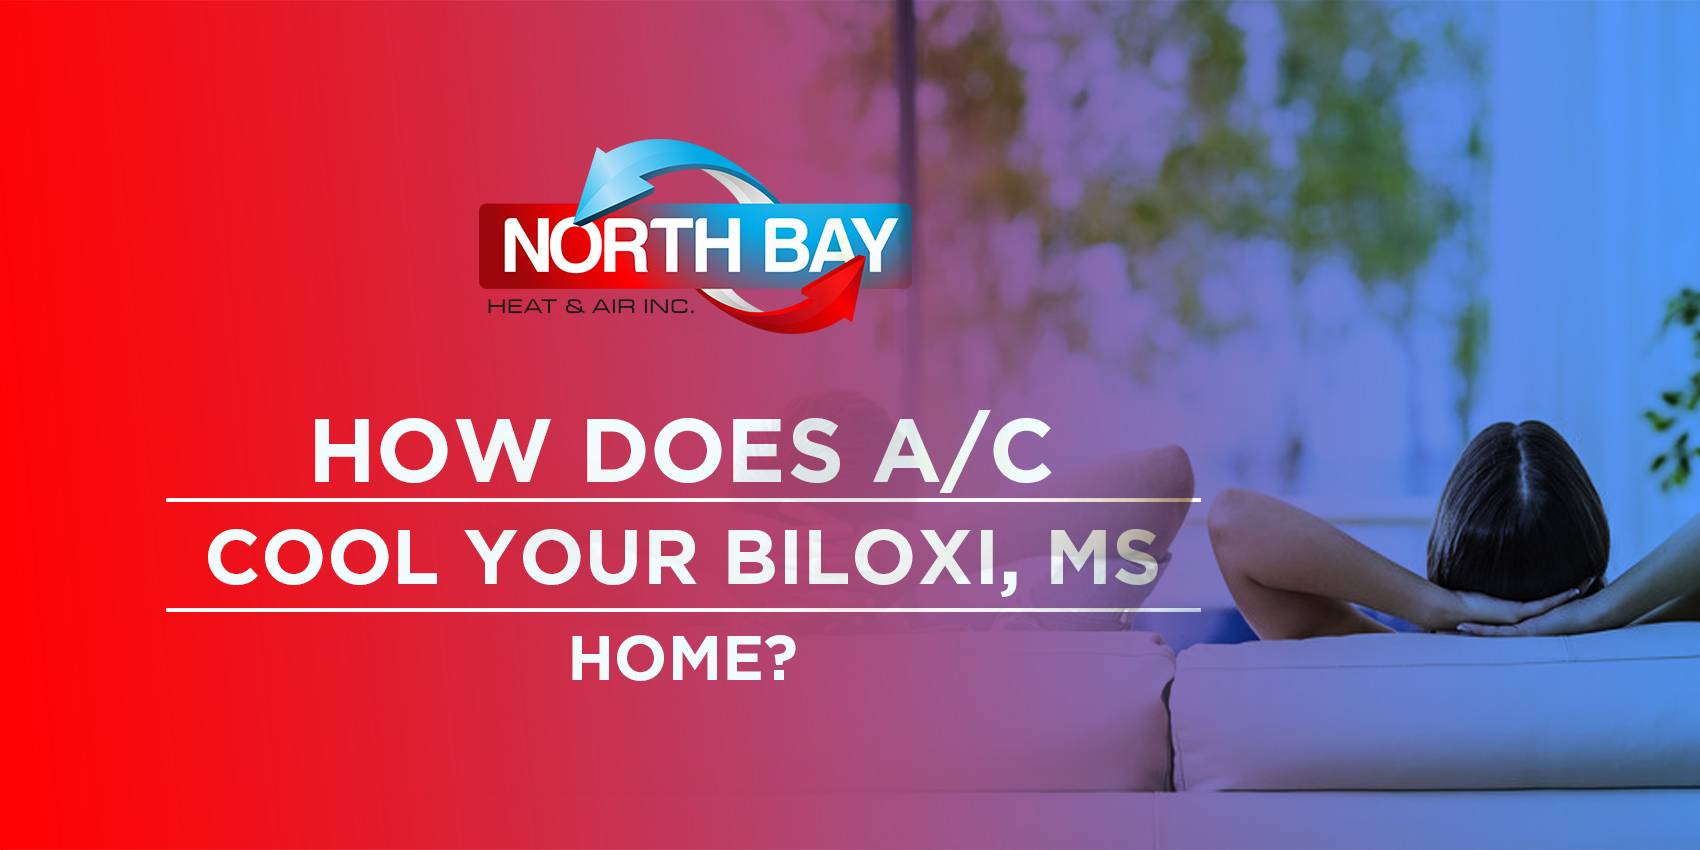 How Does A/C Cool Your Biloxi, MS Home?